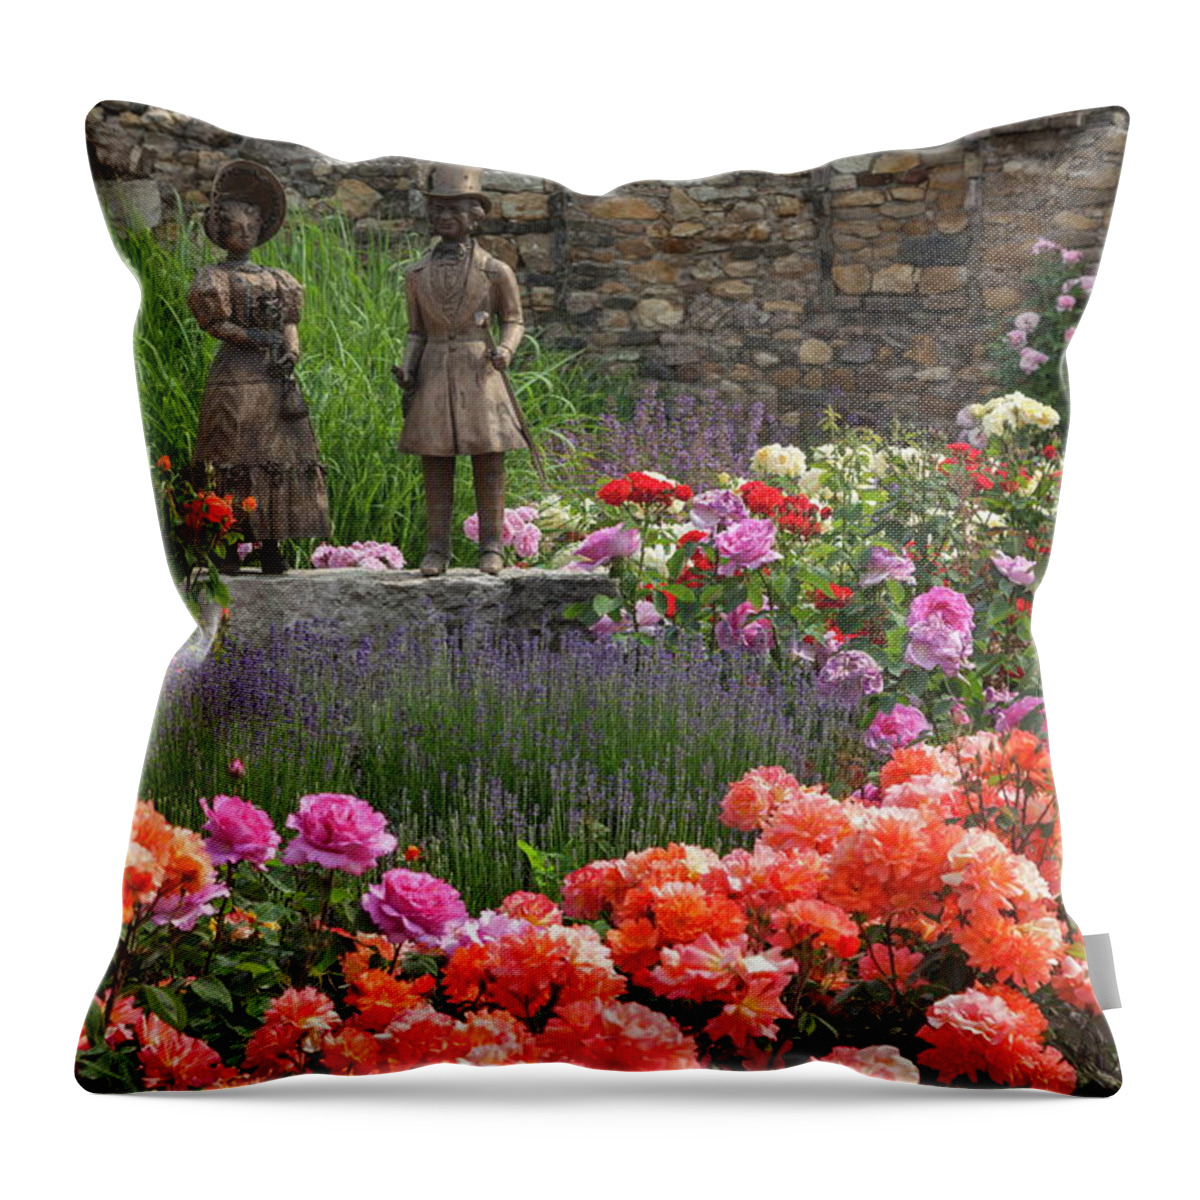 Estock Throw Pillow featuring the digital art Electoral Castle Garden, Germany by Christian Back